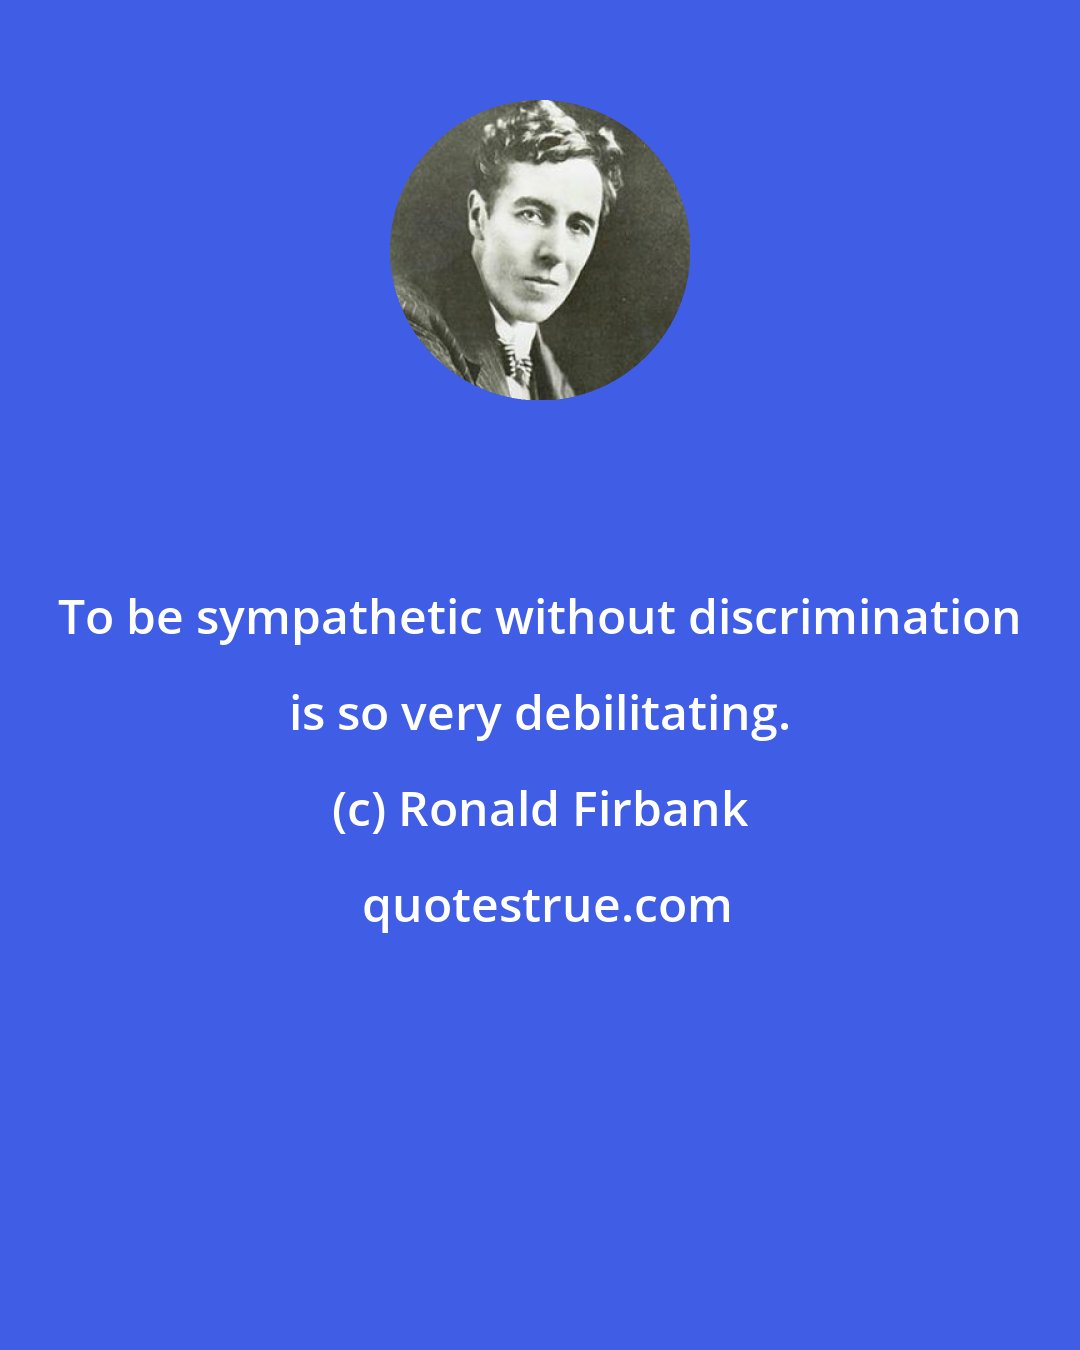 Ronald Firbank: To be sympathetic without discrimination is so very debilitating.